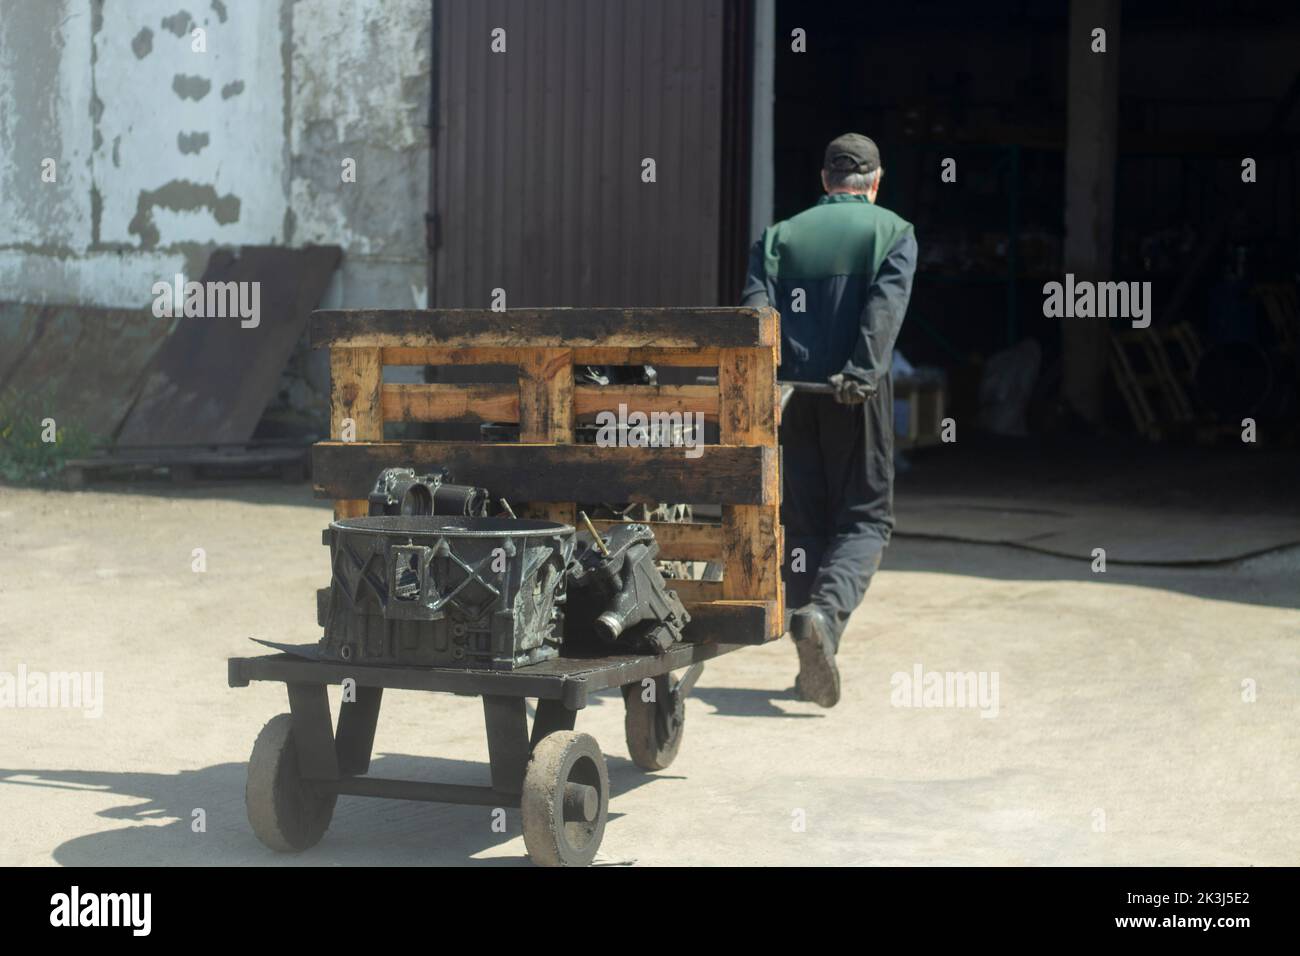 Man carries cart. Worker pulls load. Forklift on street. Man drags vehicle. Stock Photo